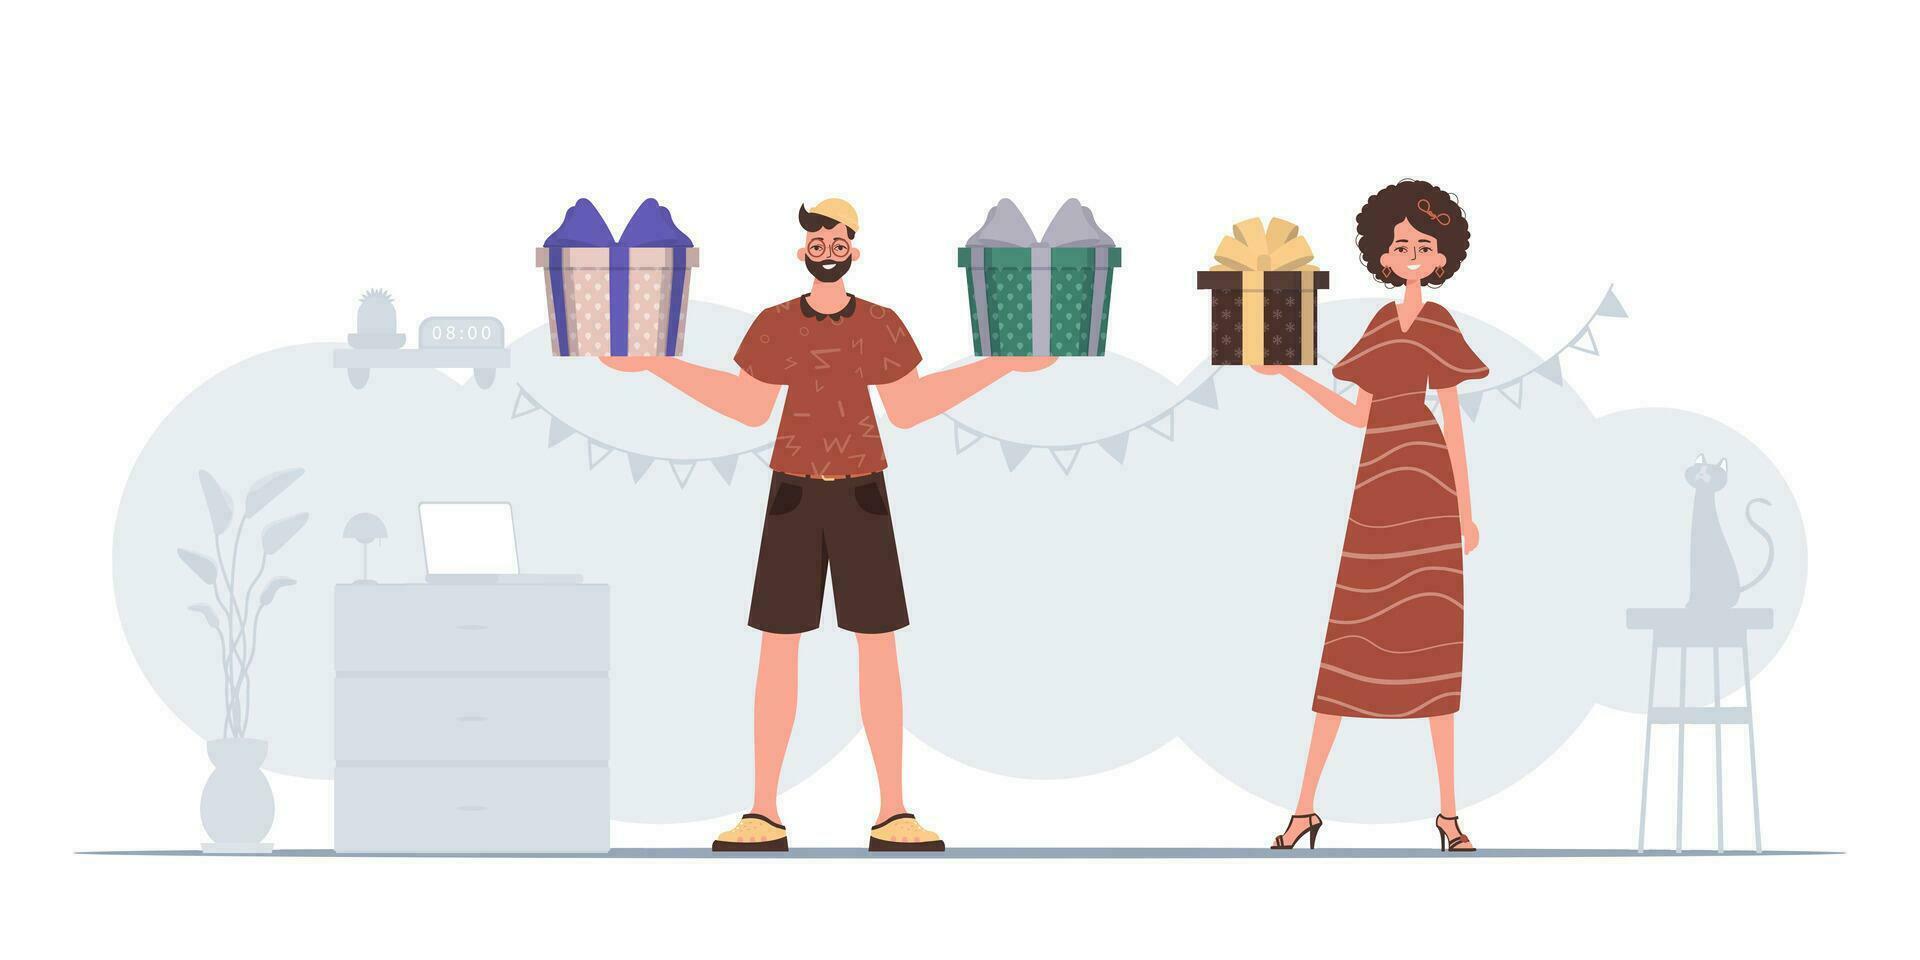 A man and a woman are holding a festive gift box in their hands. Christmas gift concept. vector